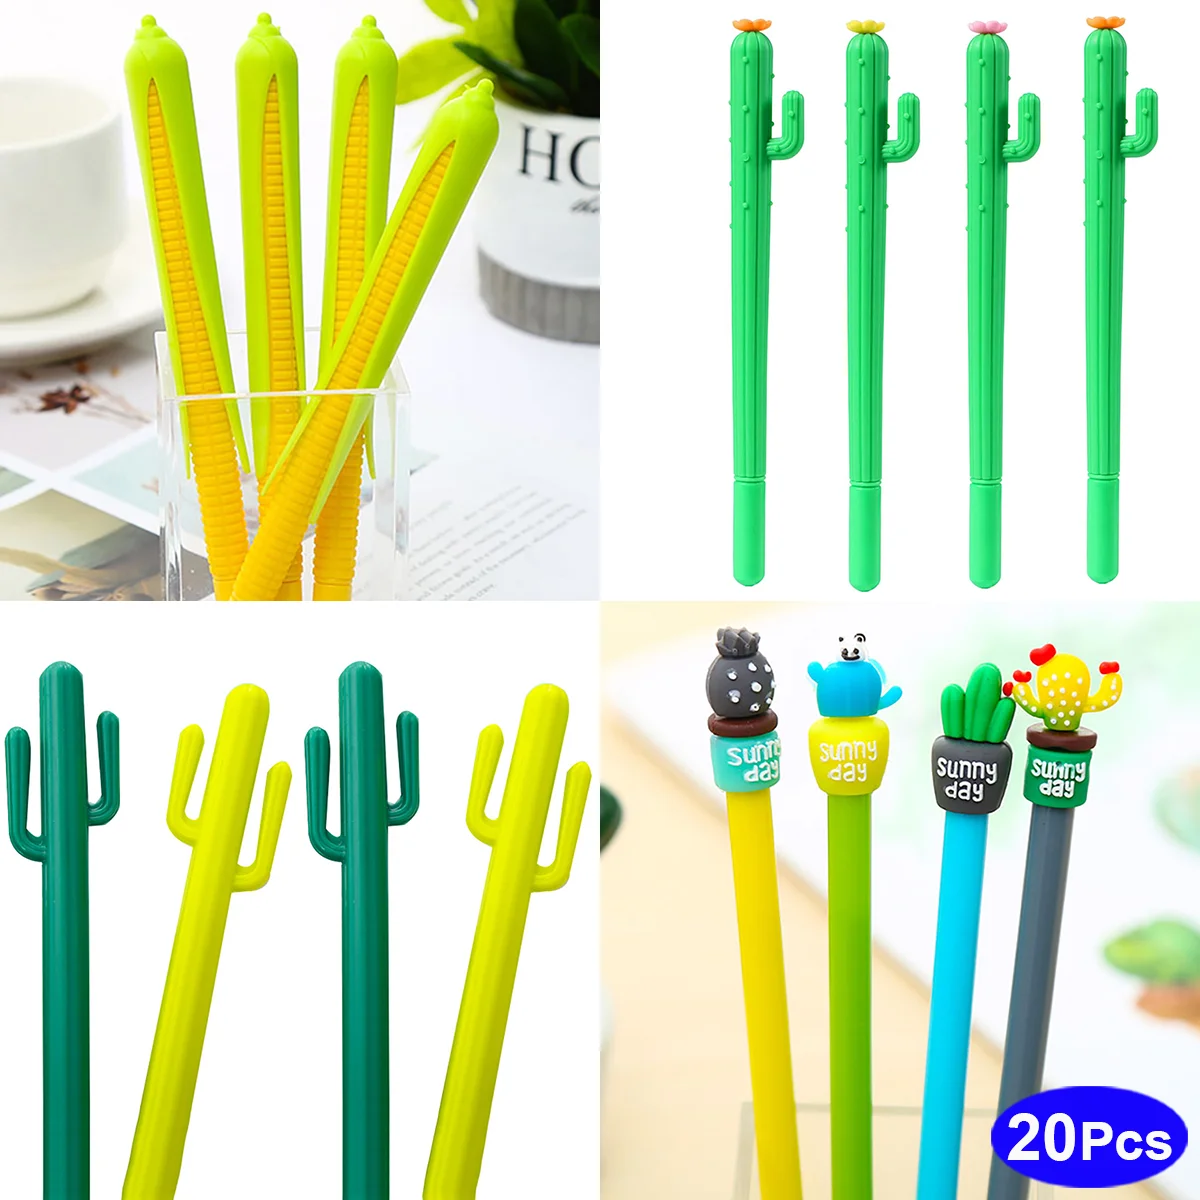 20Pc/set Novelty Cute Kawaii Pens Corn Cactus Gel Ink Pen Writing Funny Cool Ballpoint Aesthetic Stationery School Office Supply